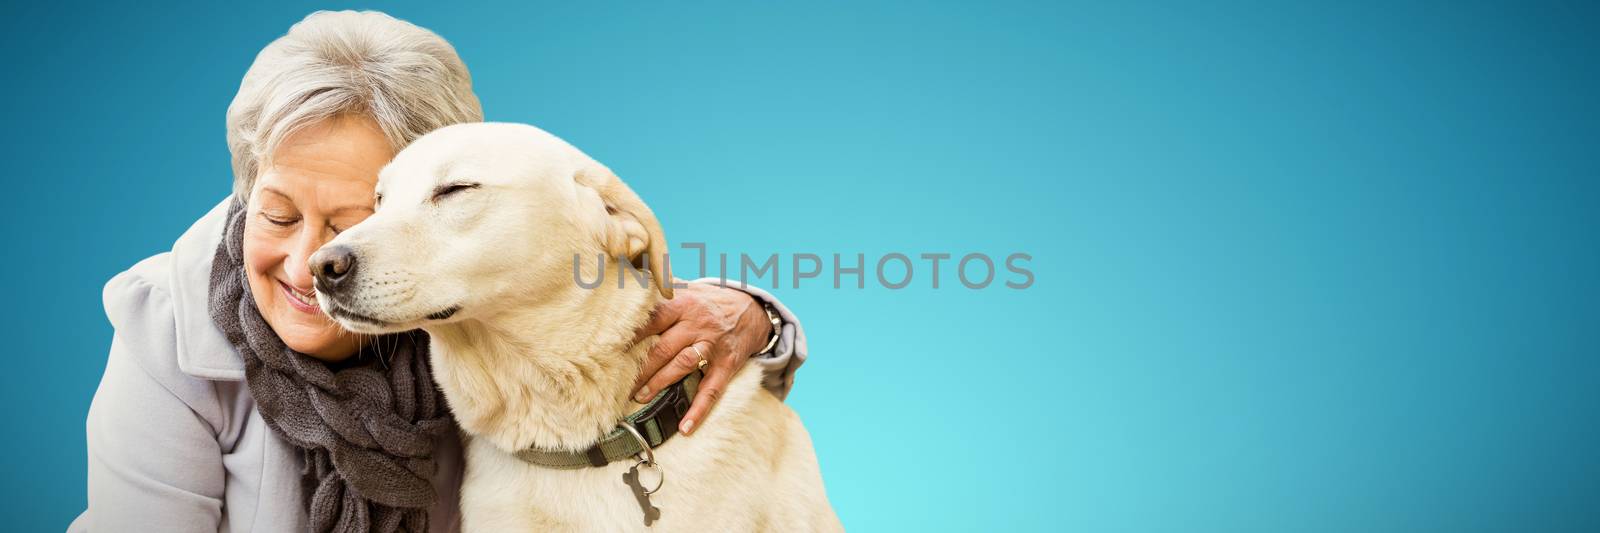 Composite image of senior woman holding a dog by Wavebreakmedia